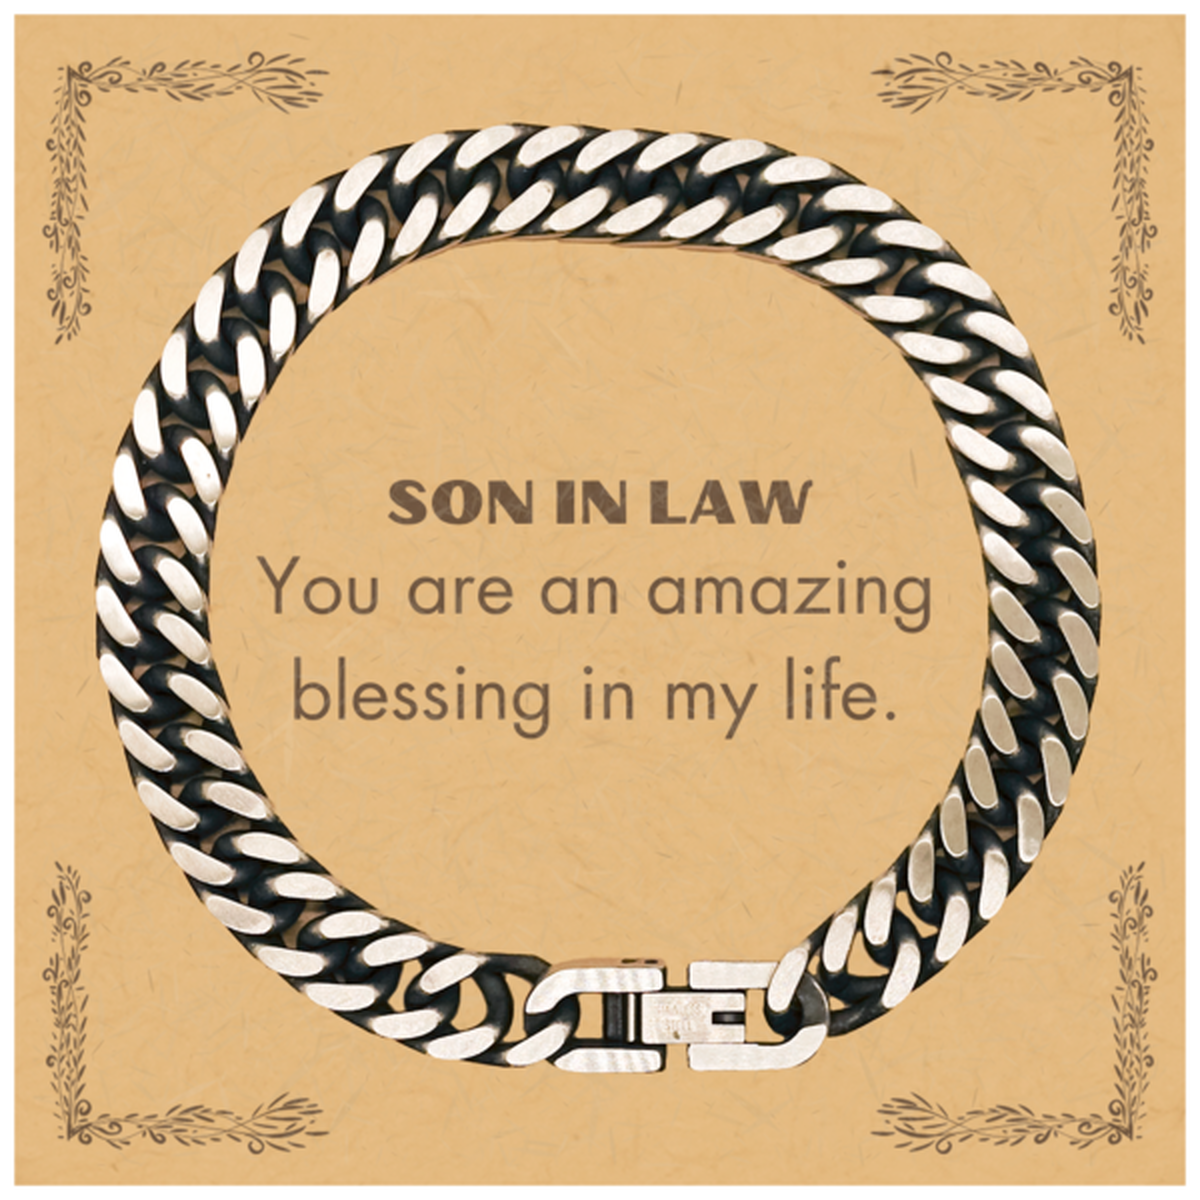 Son In Law Cuban Link Chain Bracelet, You are an amazing blessing in my life, Thank You Gifts For Son In Law, Inspirational Birthday Christmas Unique Gifts For Son In Law